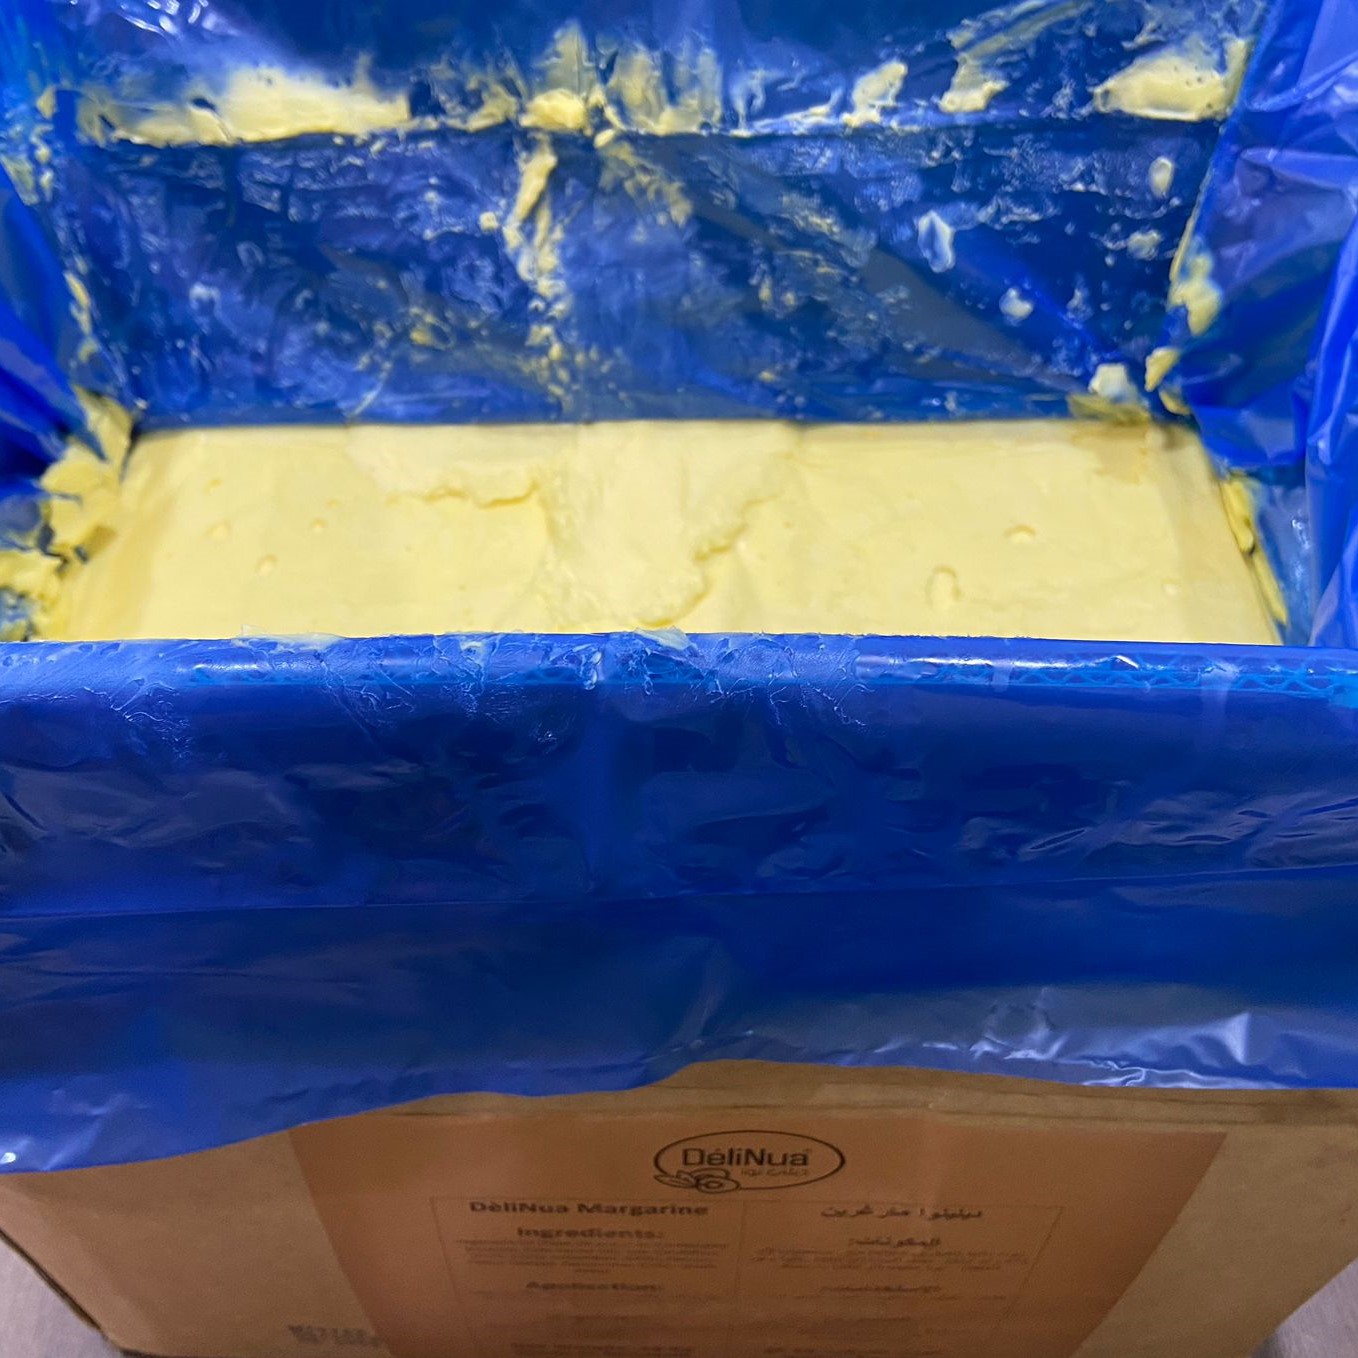 Delinua Margarine carton open and shwoing the margerine product.